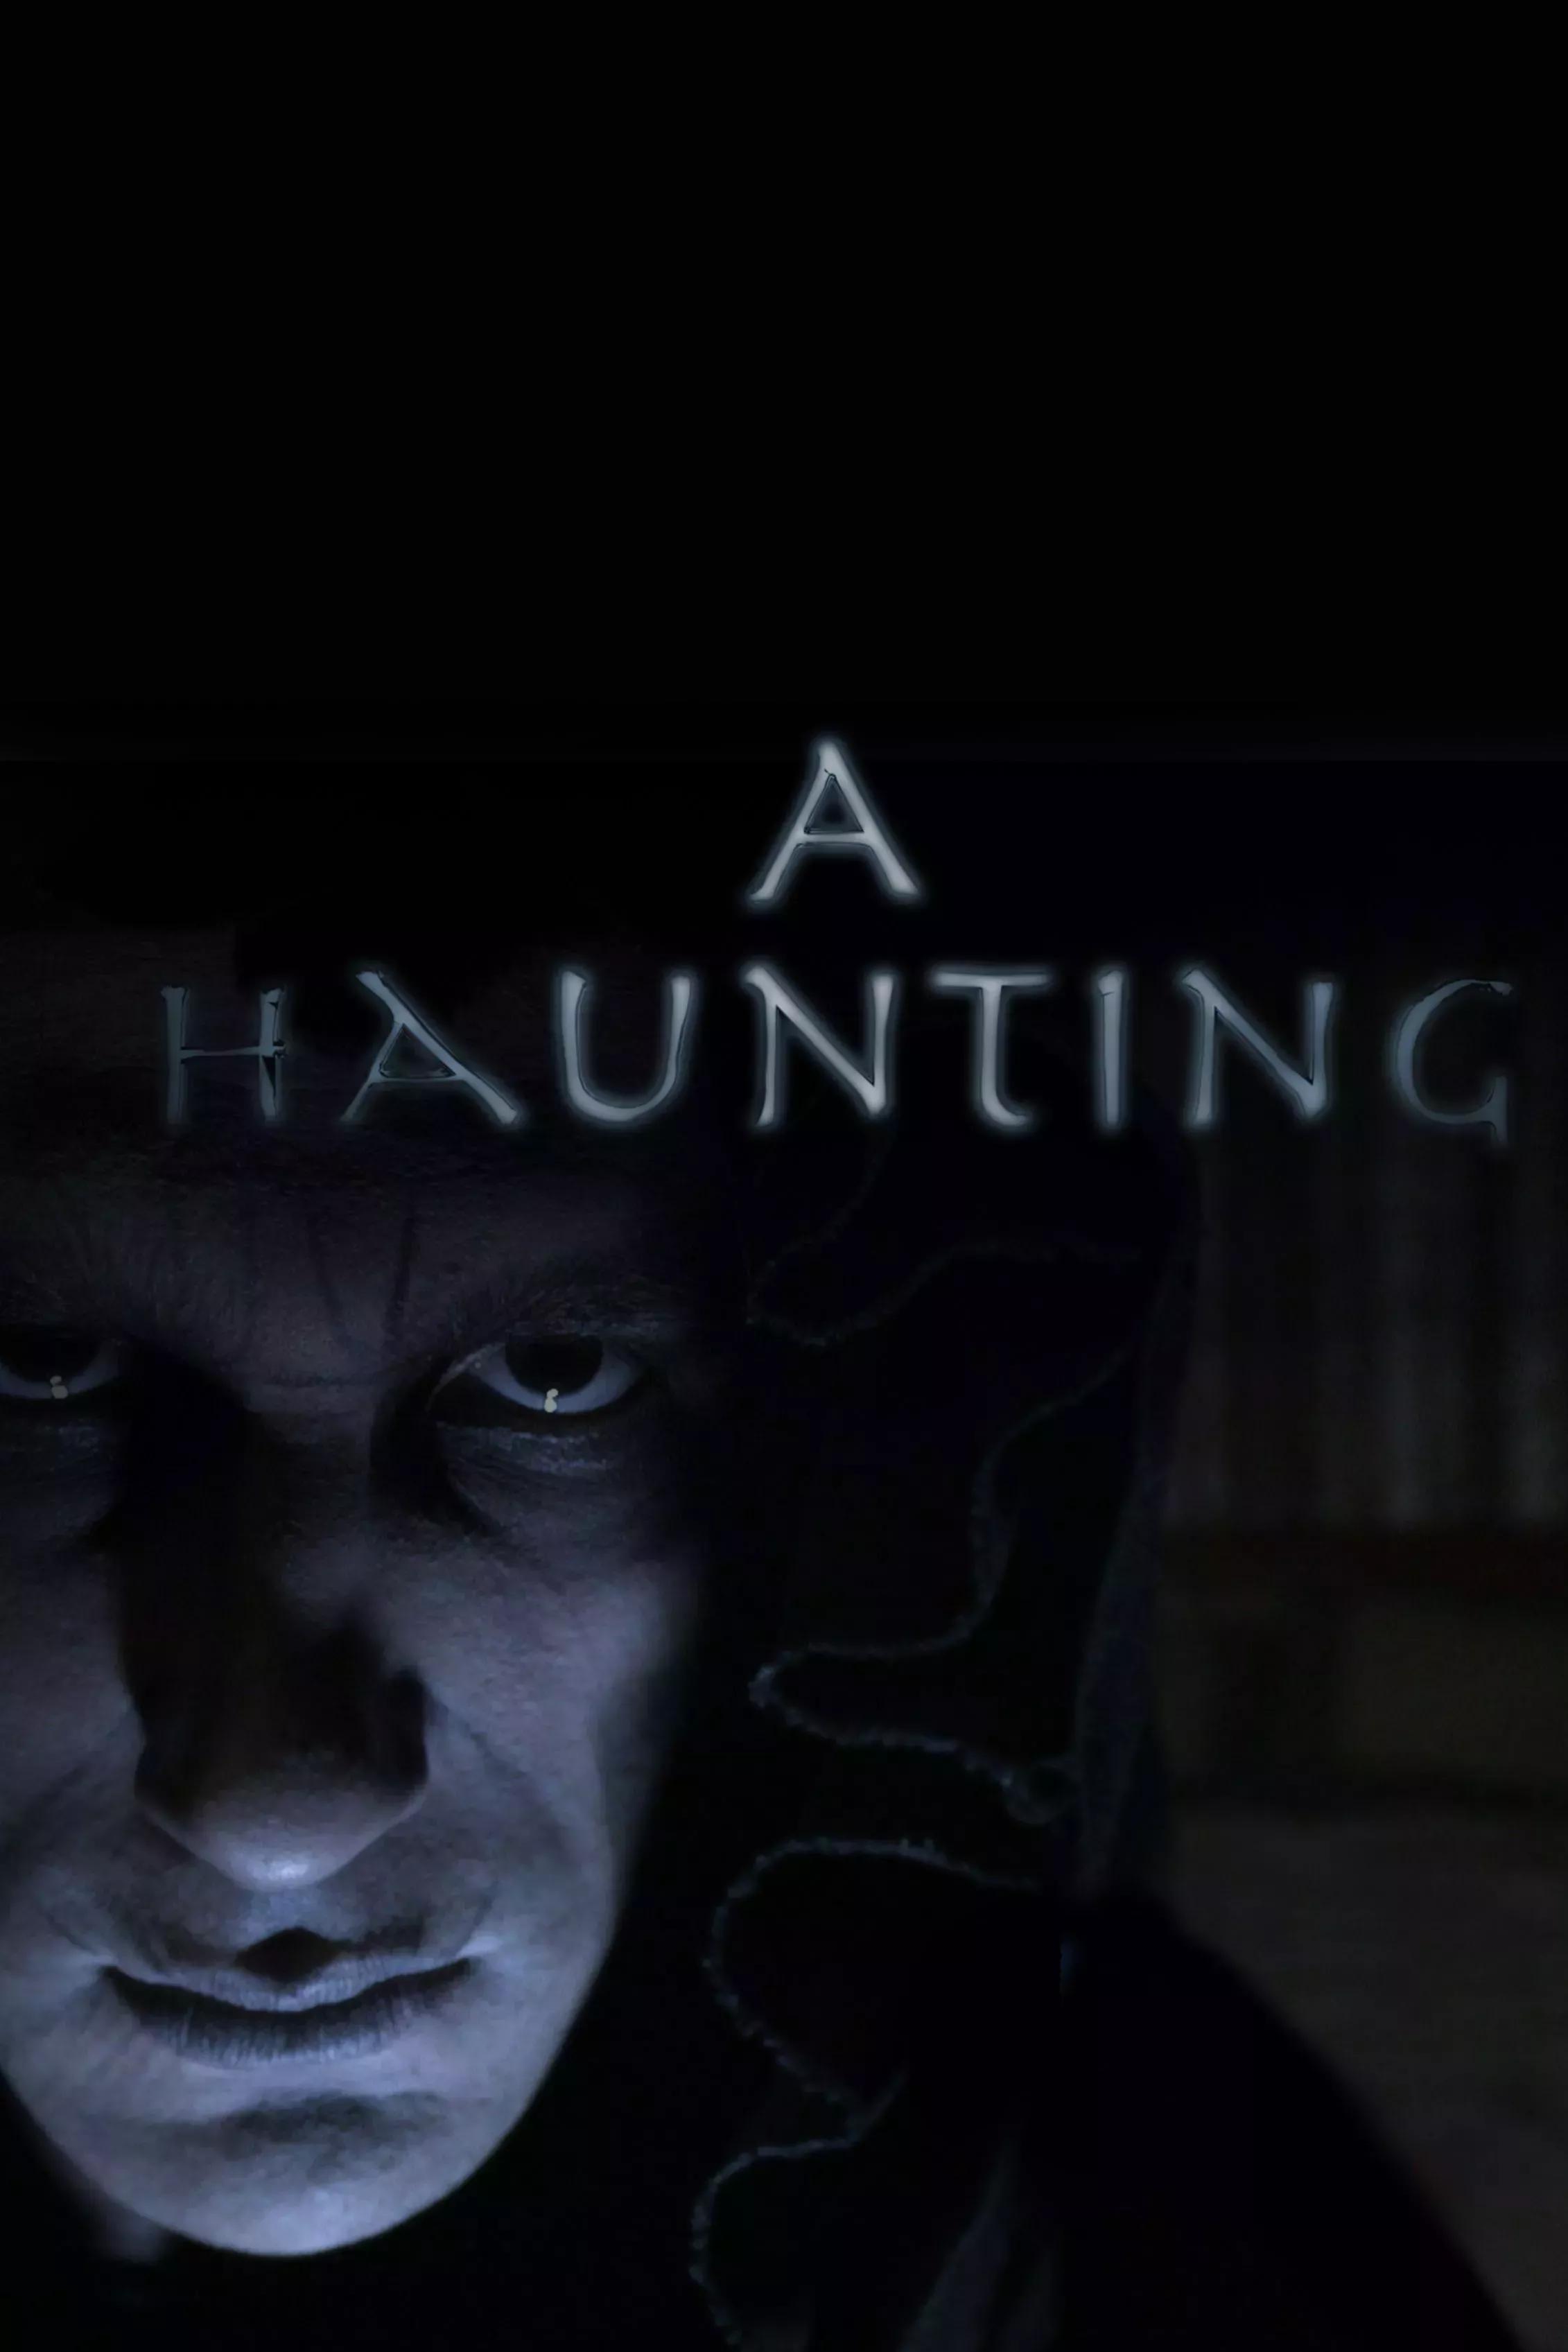 Cover for A Haunting with a man looking eerily towards the reader